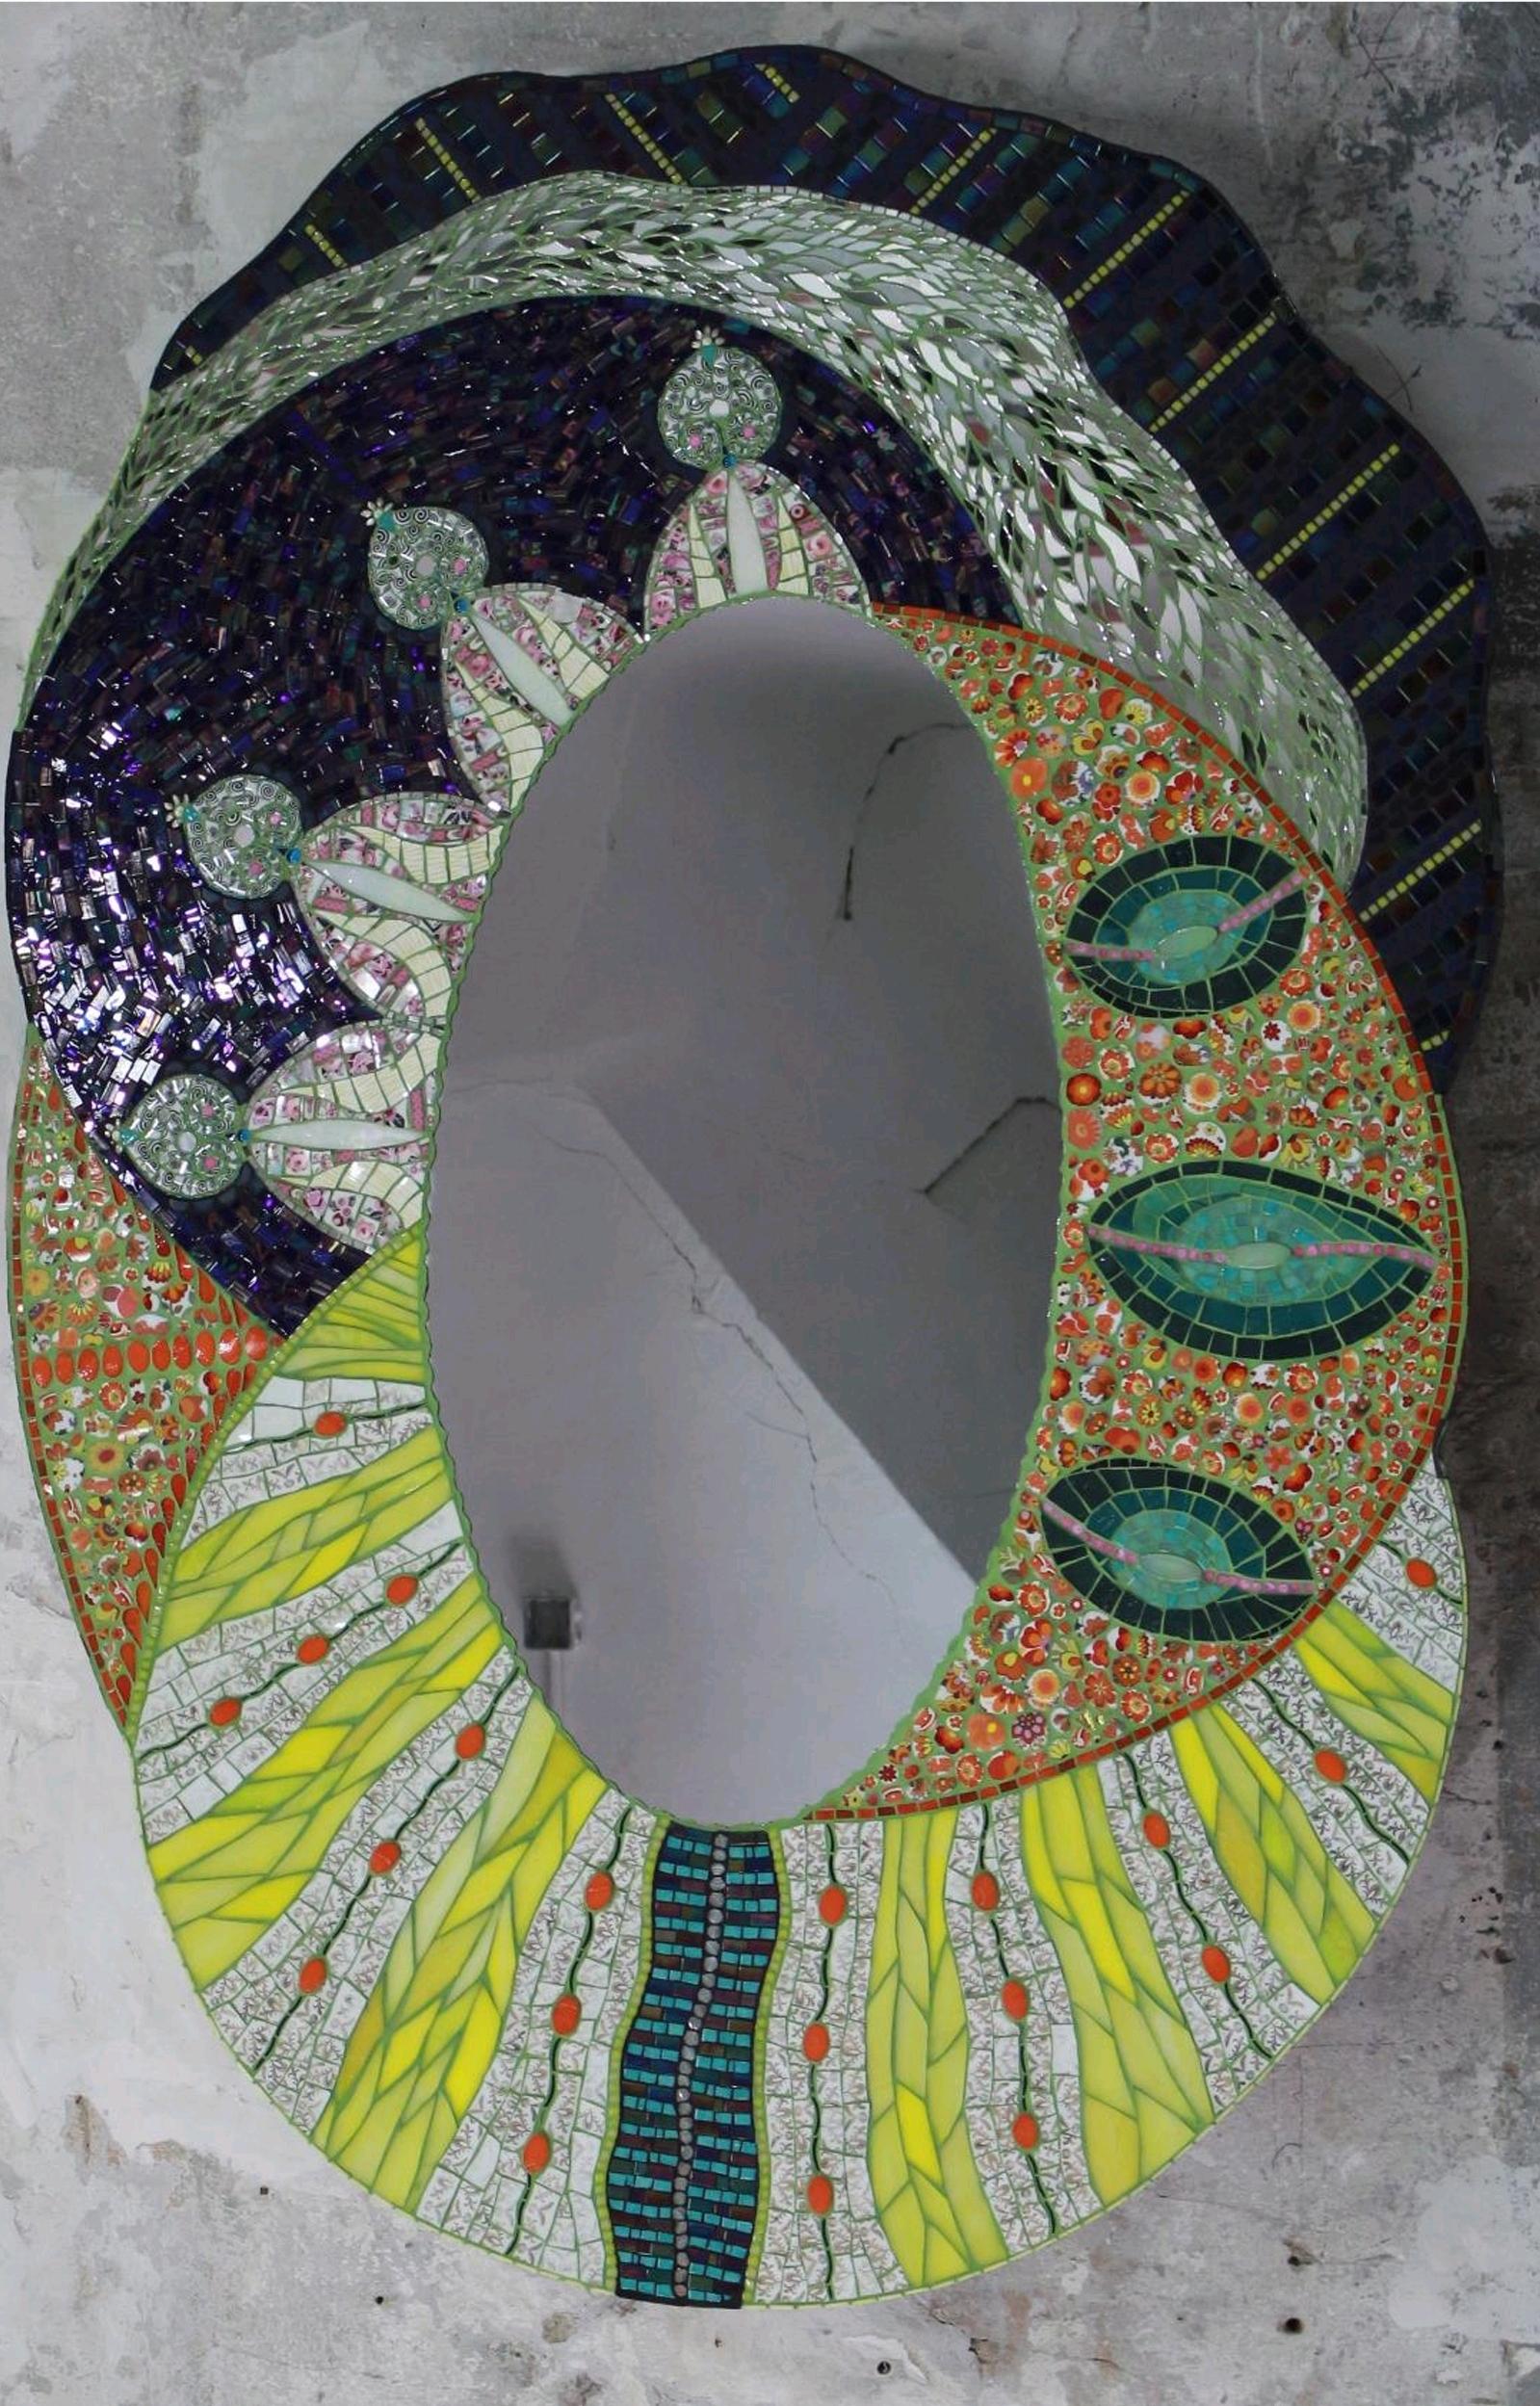 One of a kind stunning mosaic mirror, created by the artist using original vintage small customized covered in fragments of ceramic, porcelain dishes, old China, mirrors, glass, etc. All these different materials are gather together and hand cut one